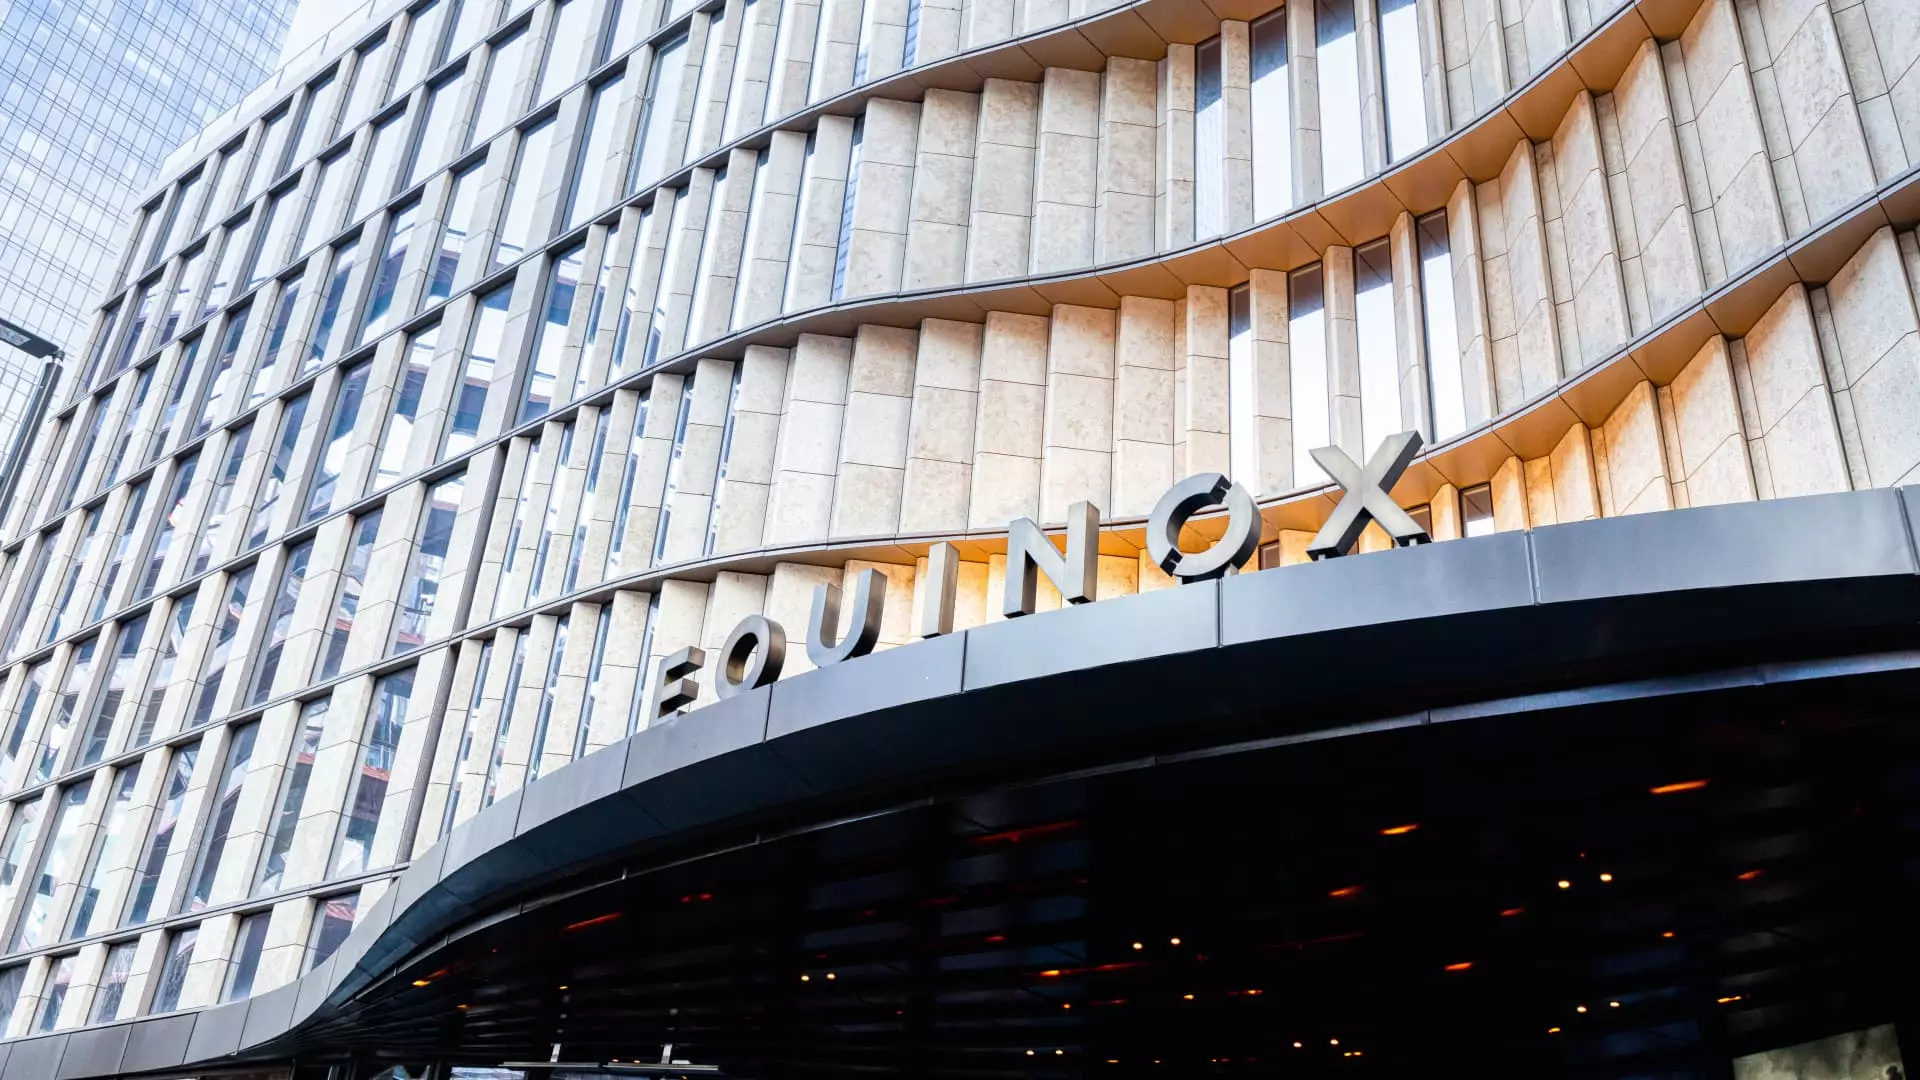 The Launch of the $40,000-Per-Year High-End Gym Membership Program by Equinox